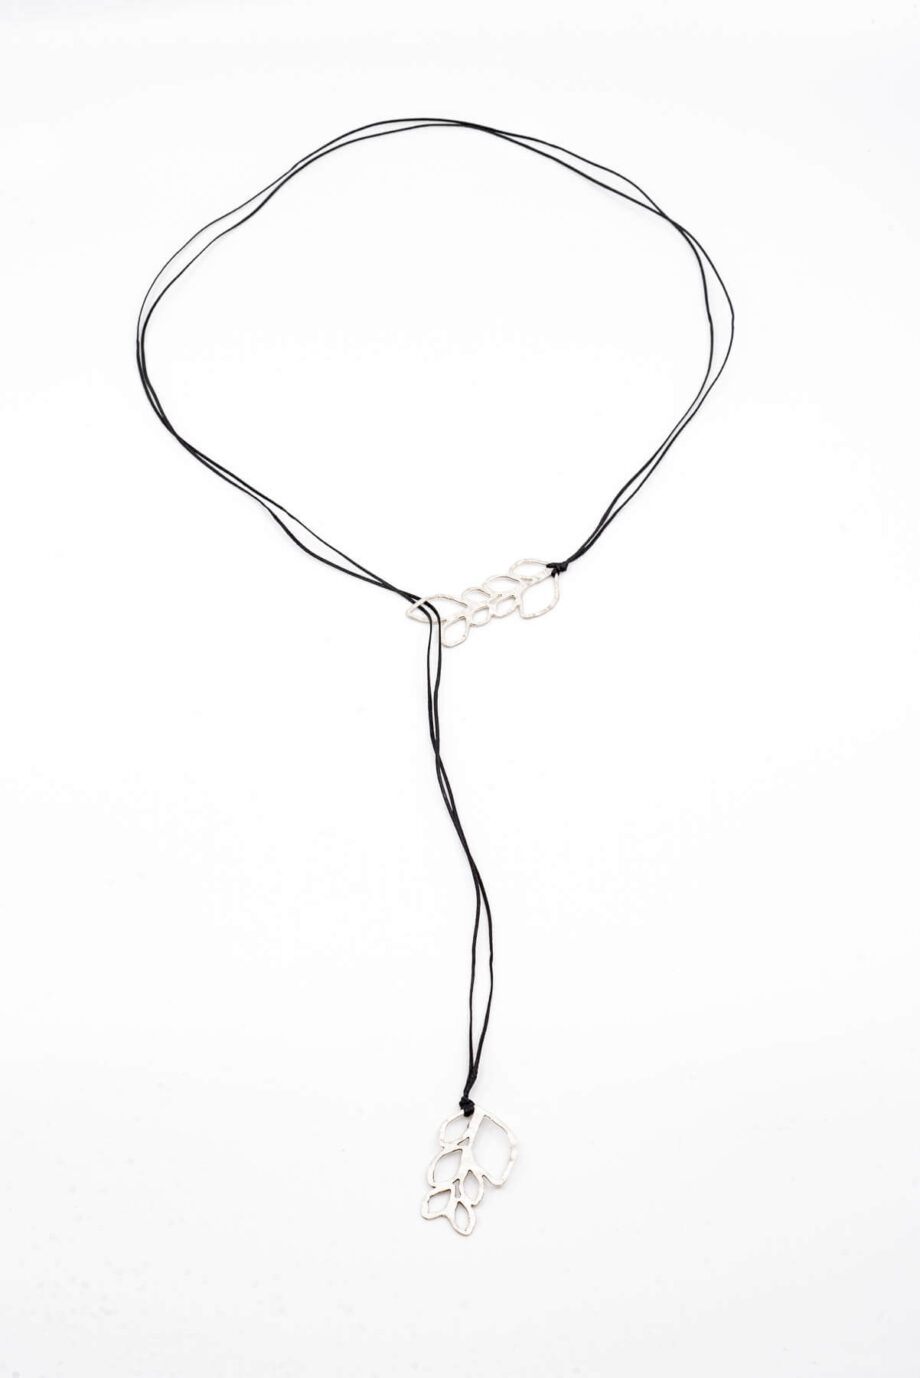 Marilena Synthesis Necklace 46 285